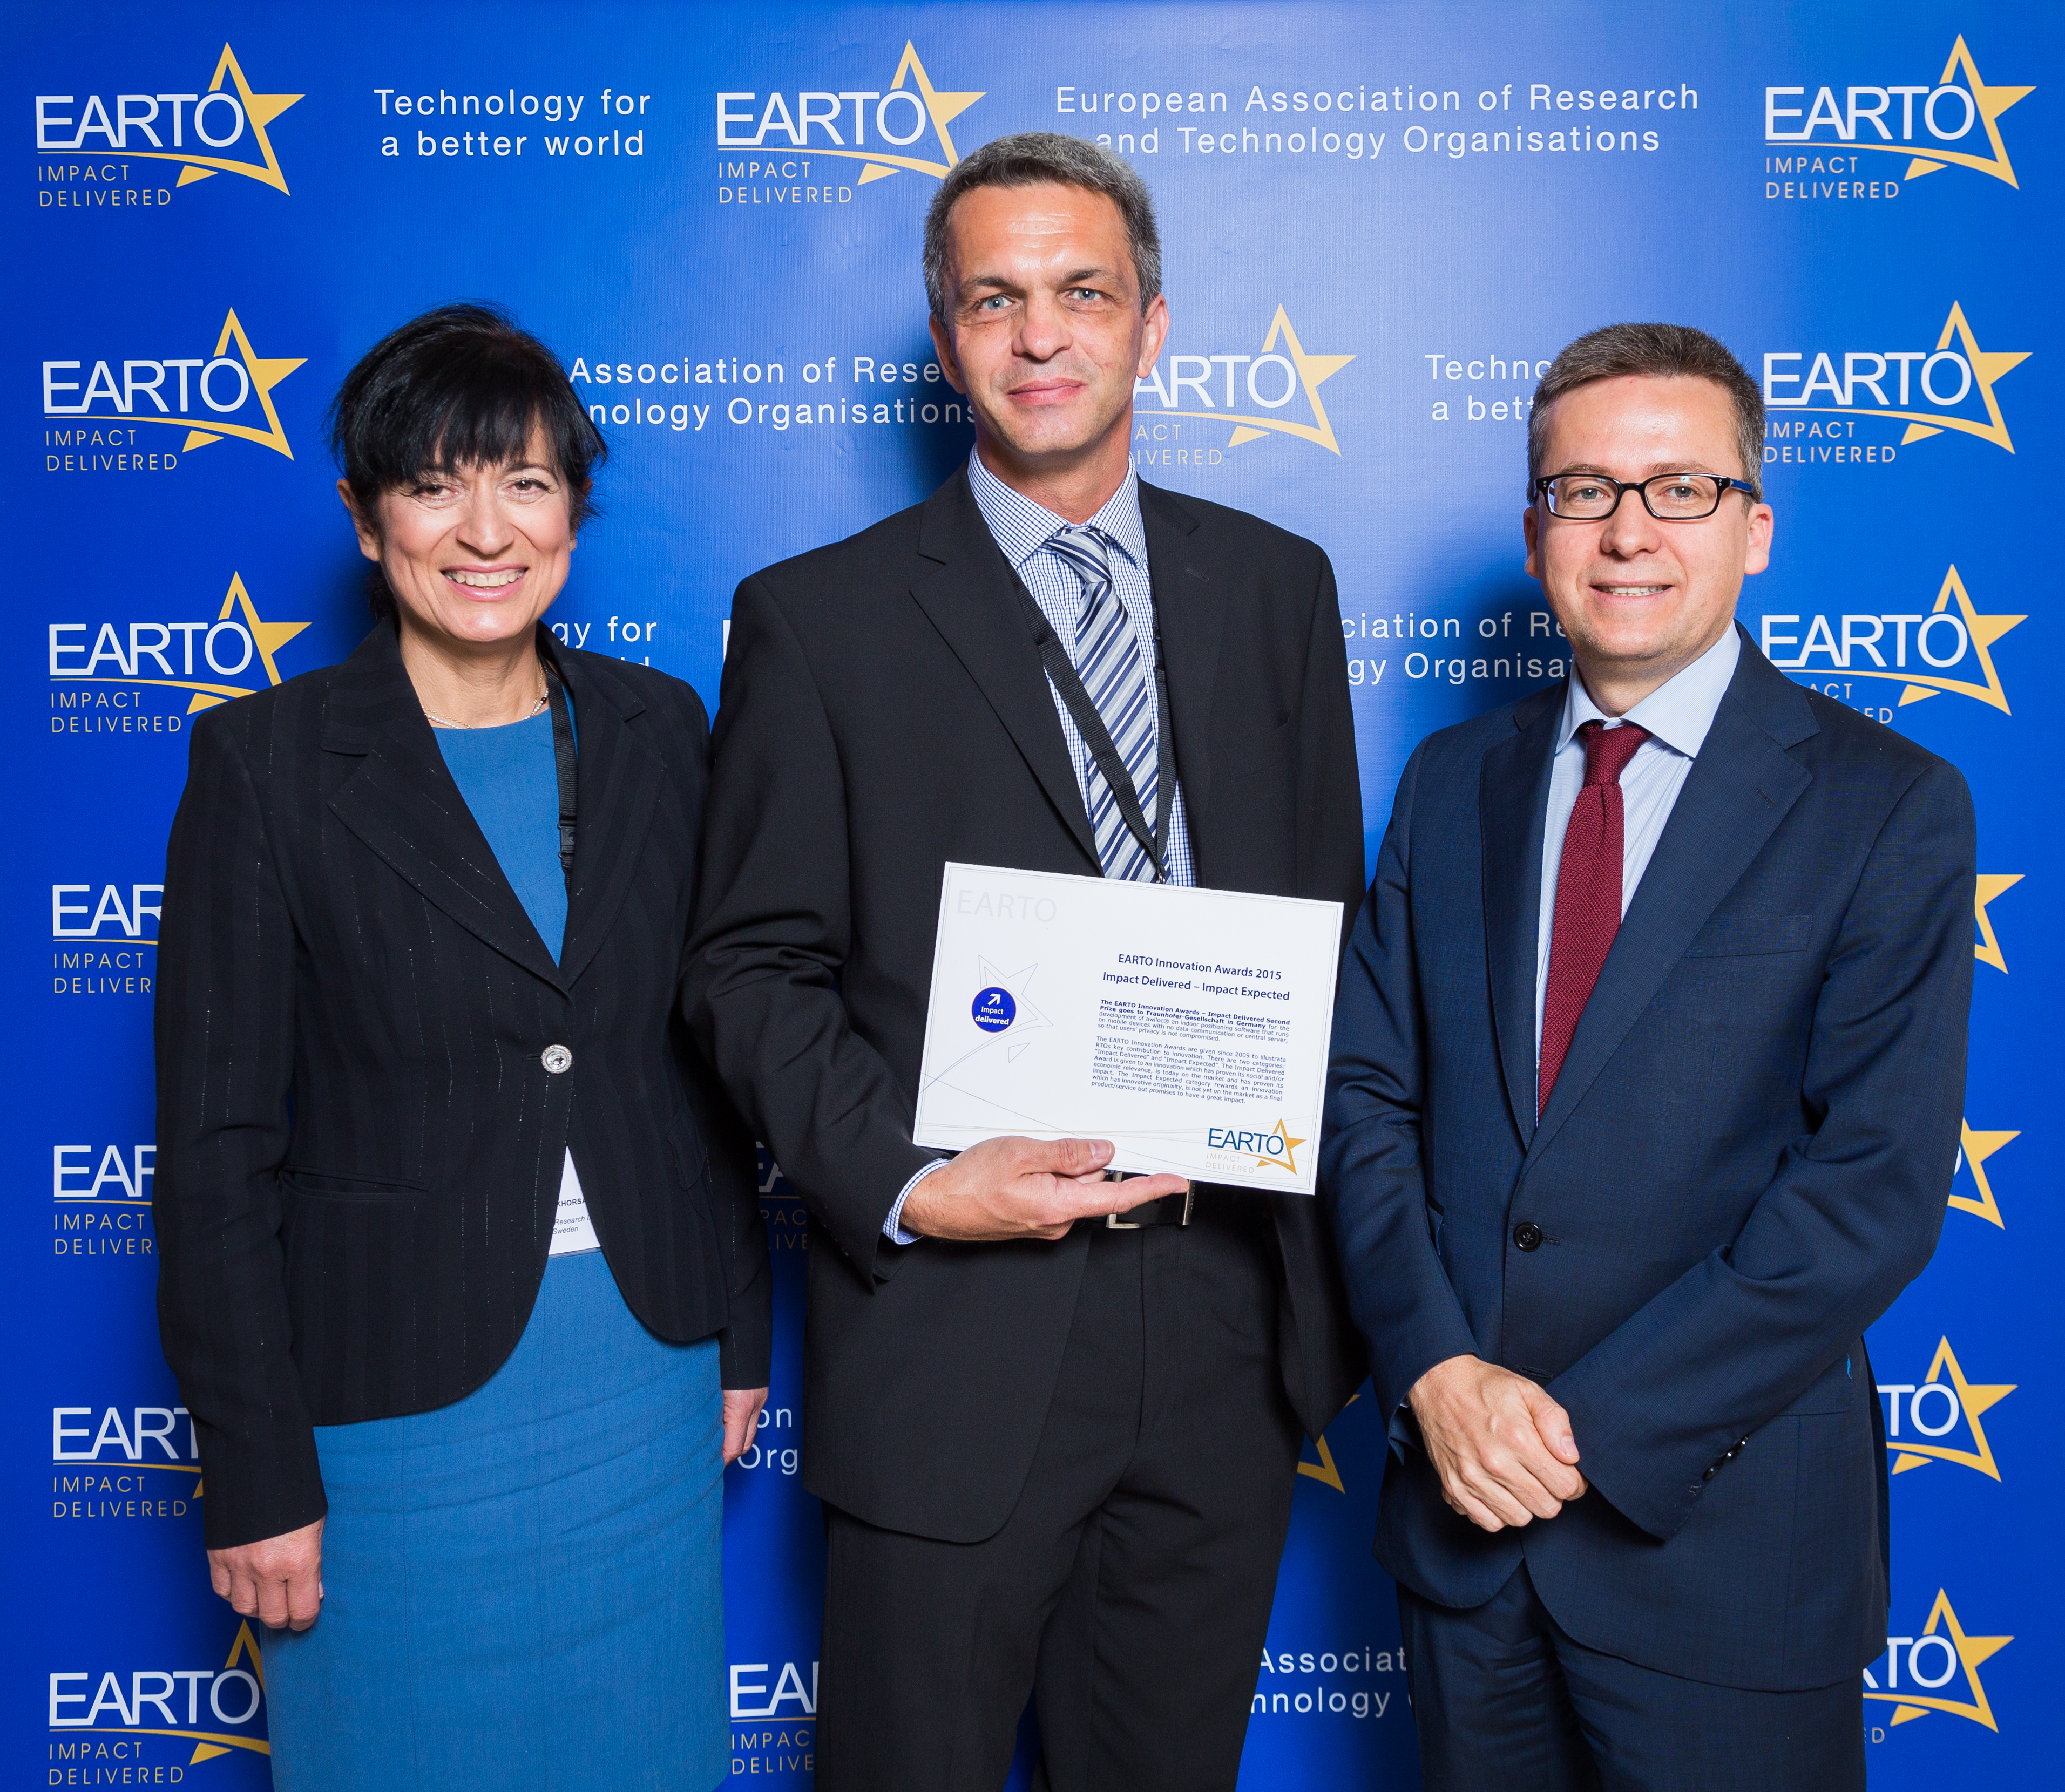 Jürgen Hupp of Fraunhofer IIS received the EARTO award for the localization technology awiloc®. From left to right: Jürgen Hupp, Fraunhofer IIS, Maria Khorsand, President EARTO, Carlos  Moedas, European Commissioner for Research, Science and Innovation, European Commission.